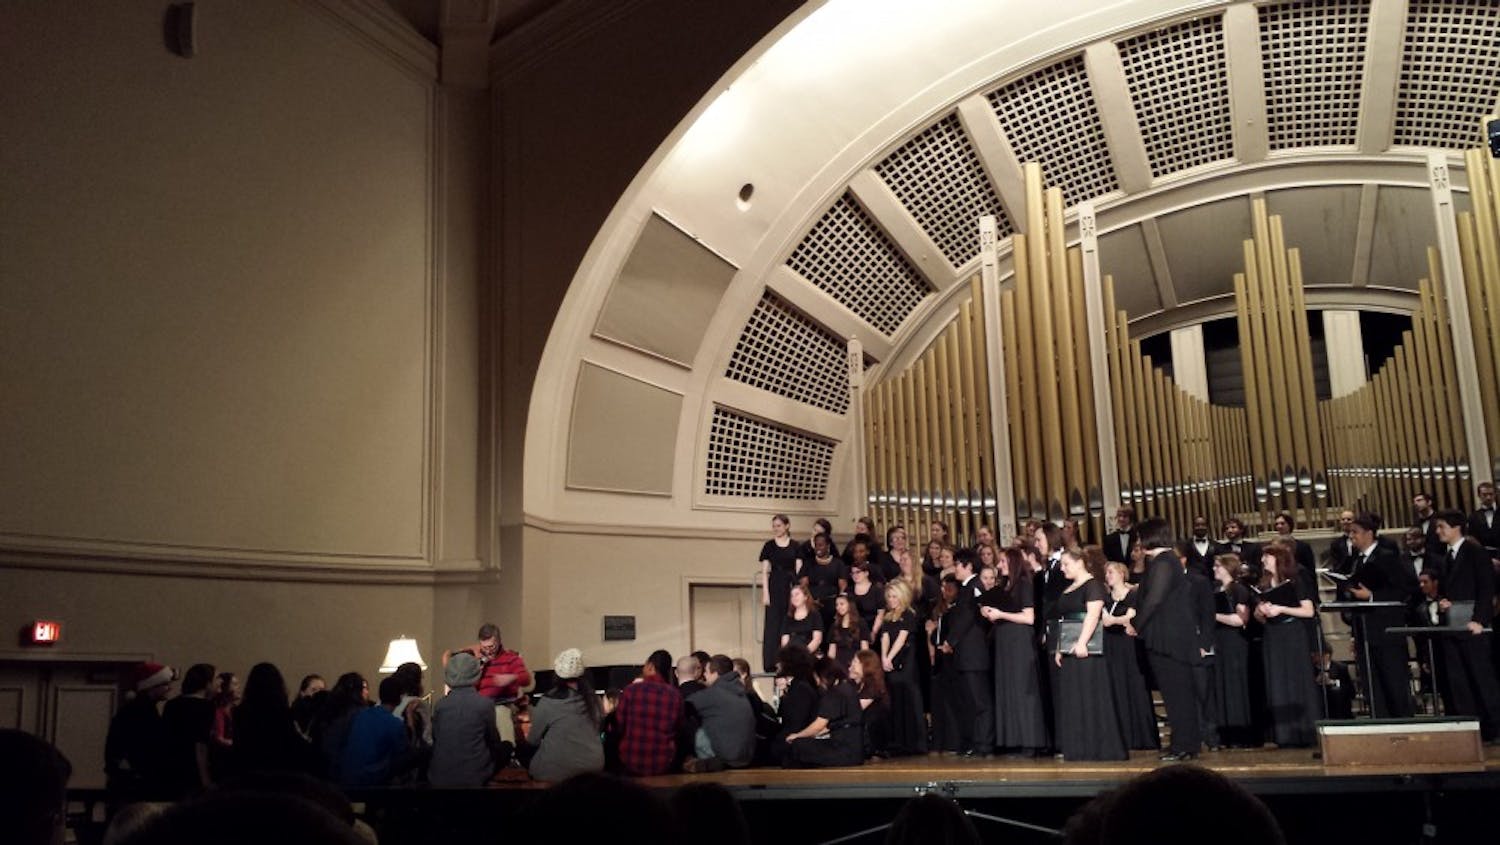 	The University Choir and the prestiguous Chamber Choir are composed of both music majors and nonmajors. Various instrumentalists accompanied the ensembles to add some spice to the festive “Peace on Earth” program.